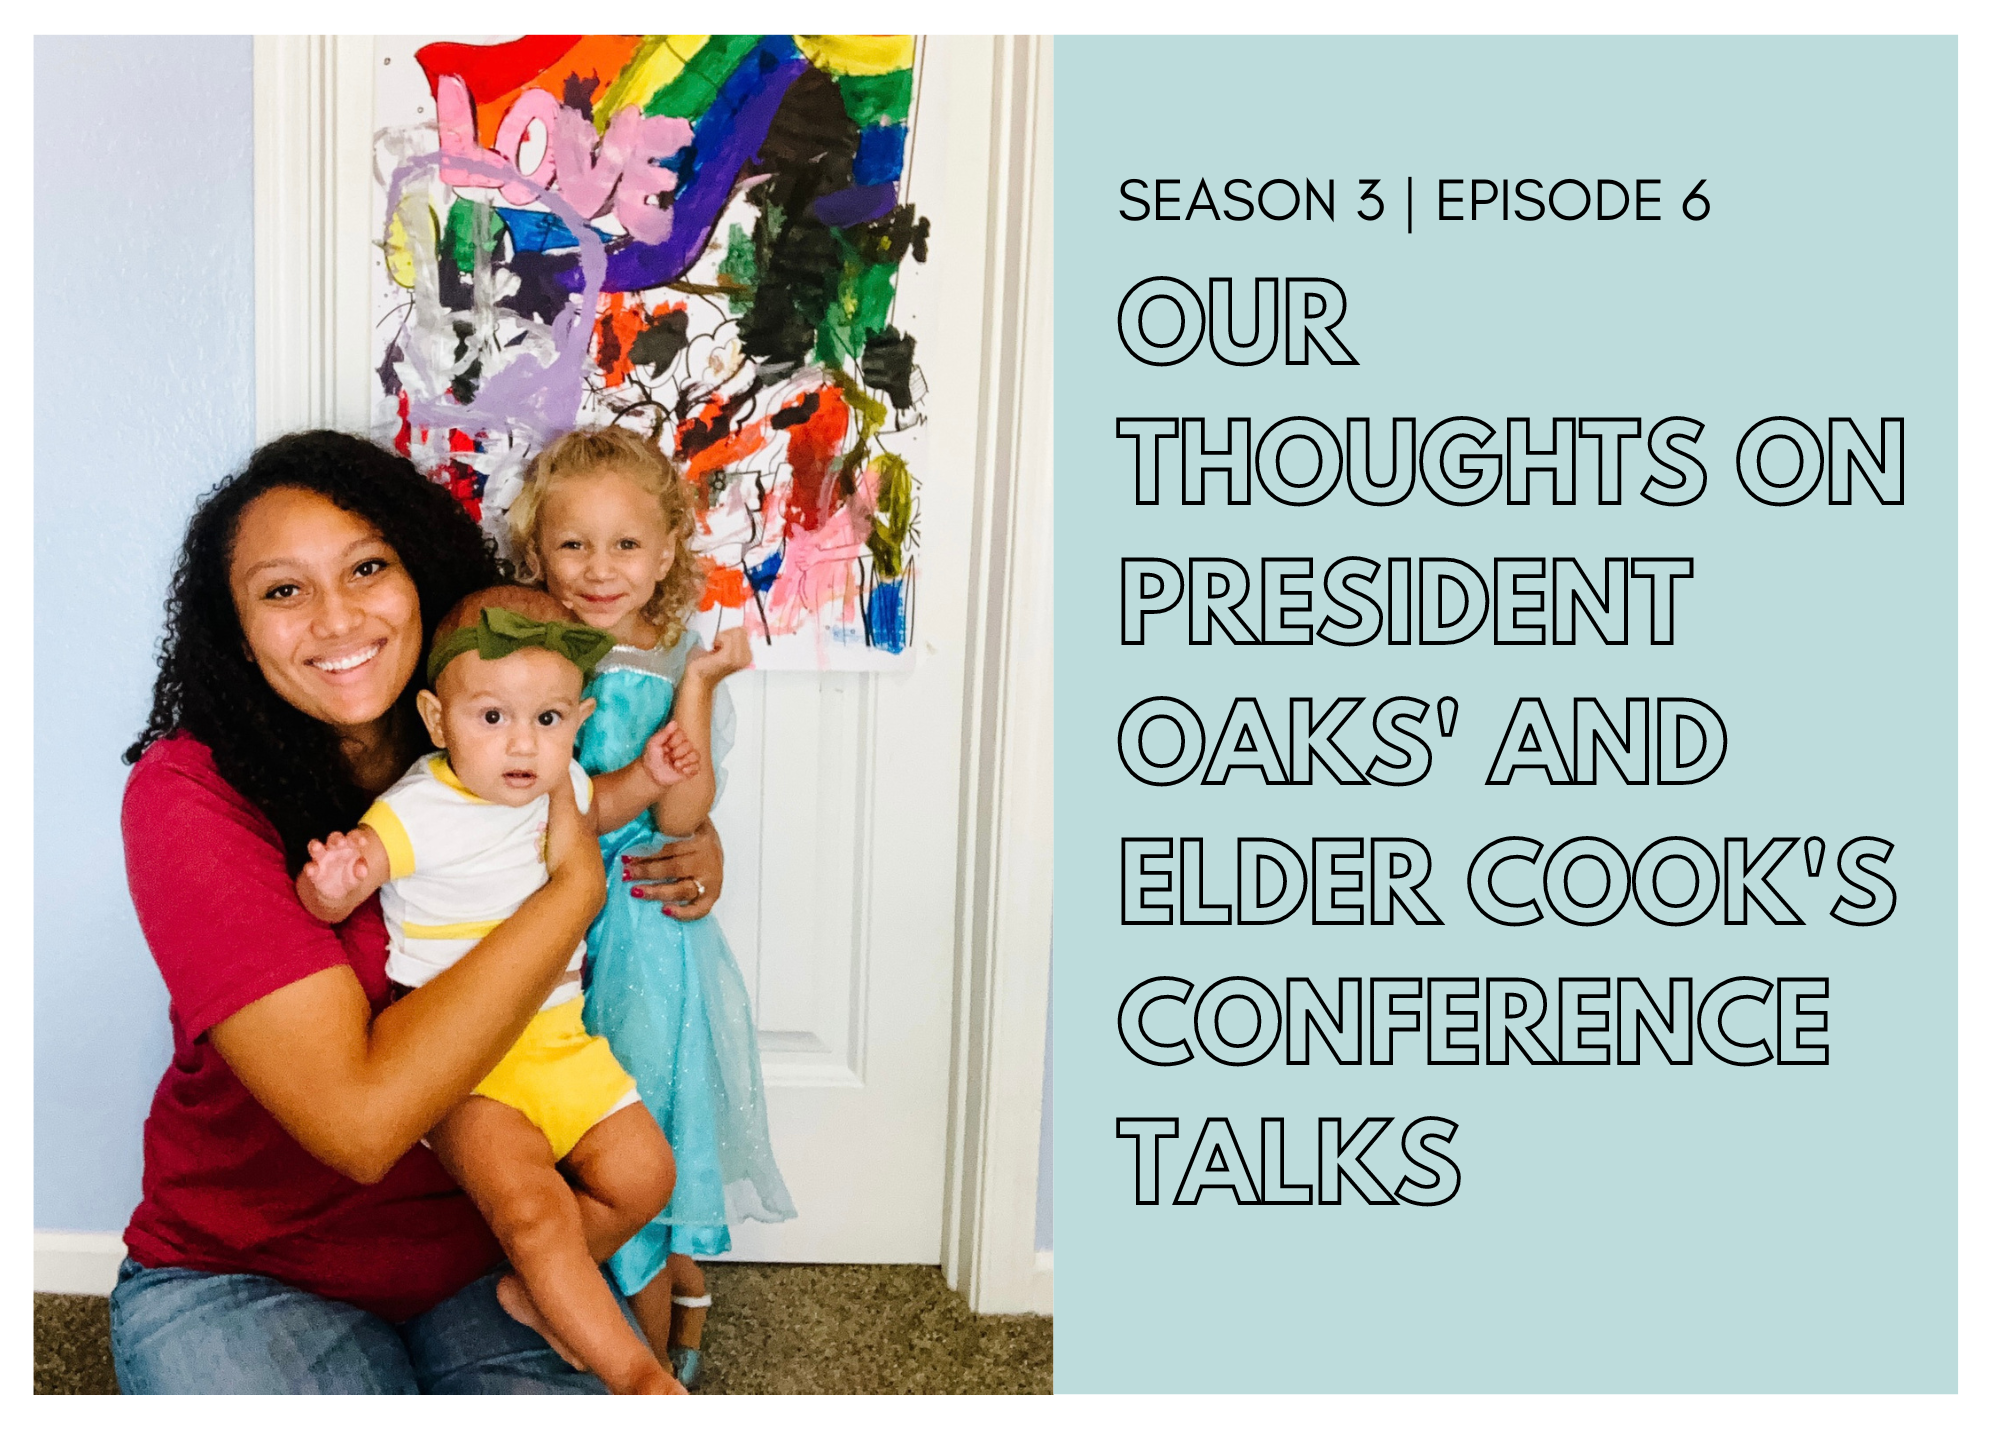 Our Thoughts on President Oaks’ and Elder Cook’s Conference Talks